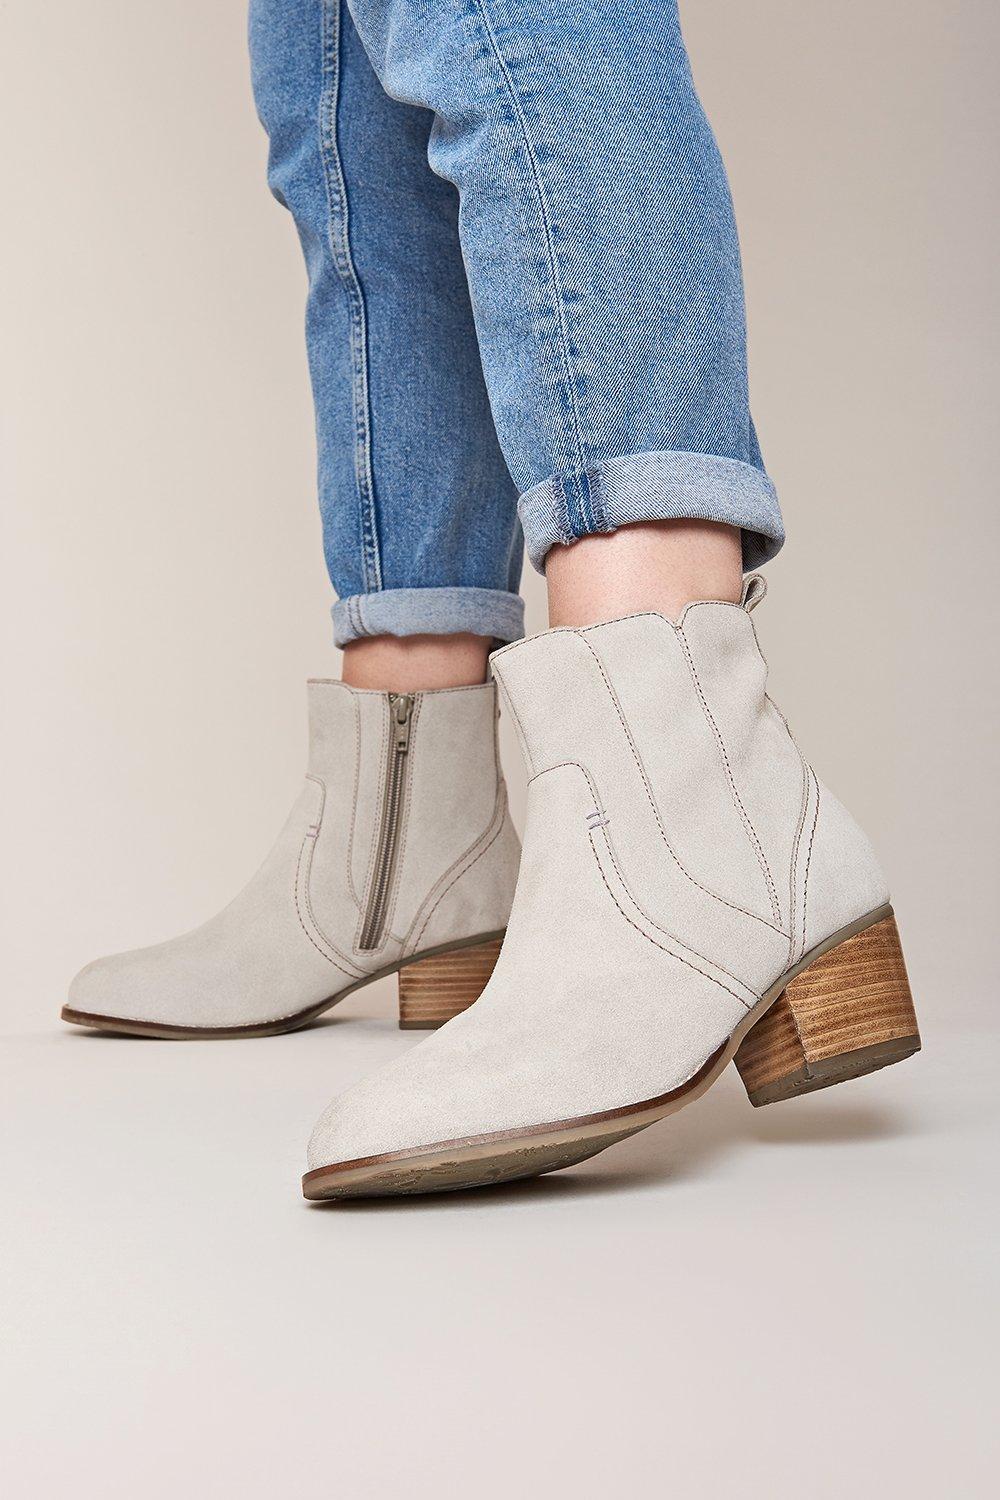 'Morisot' Western Inspired Heeled Ankle Boot